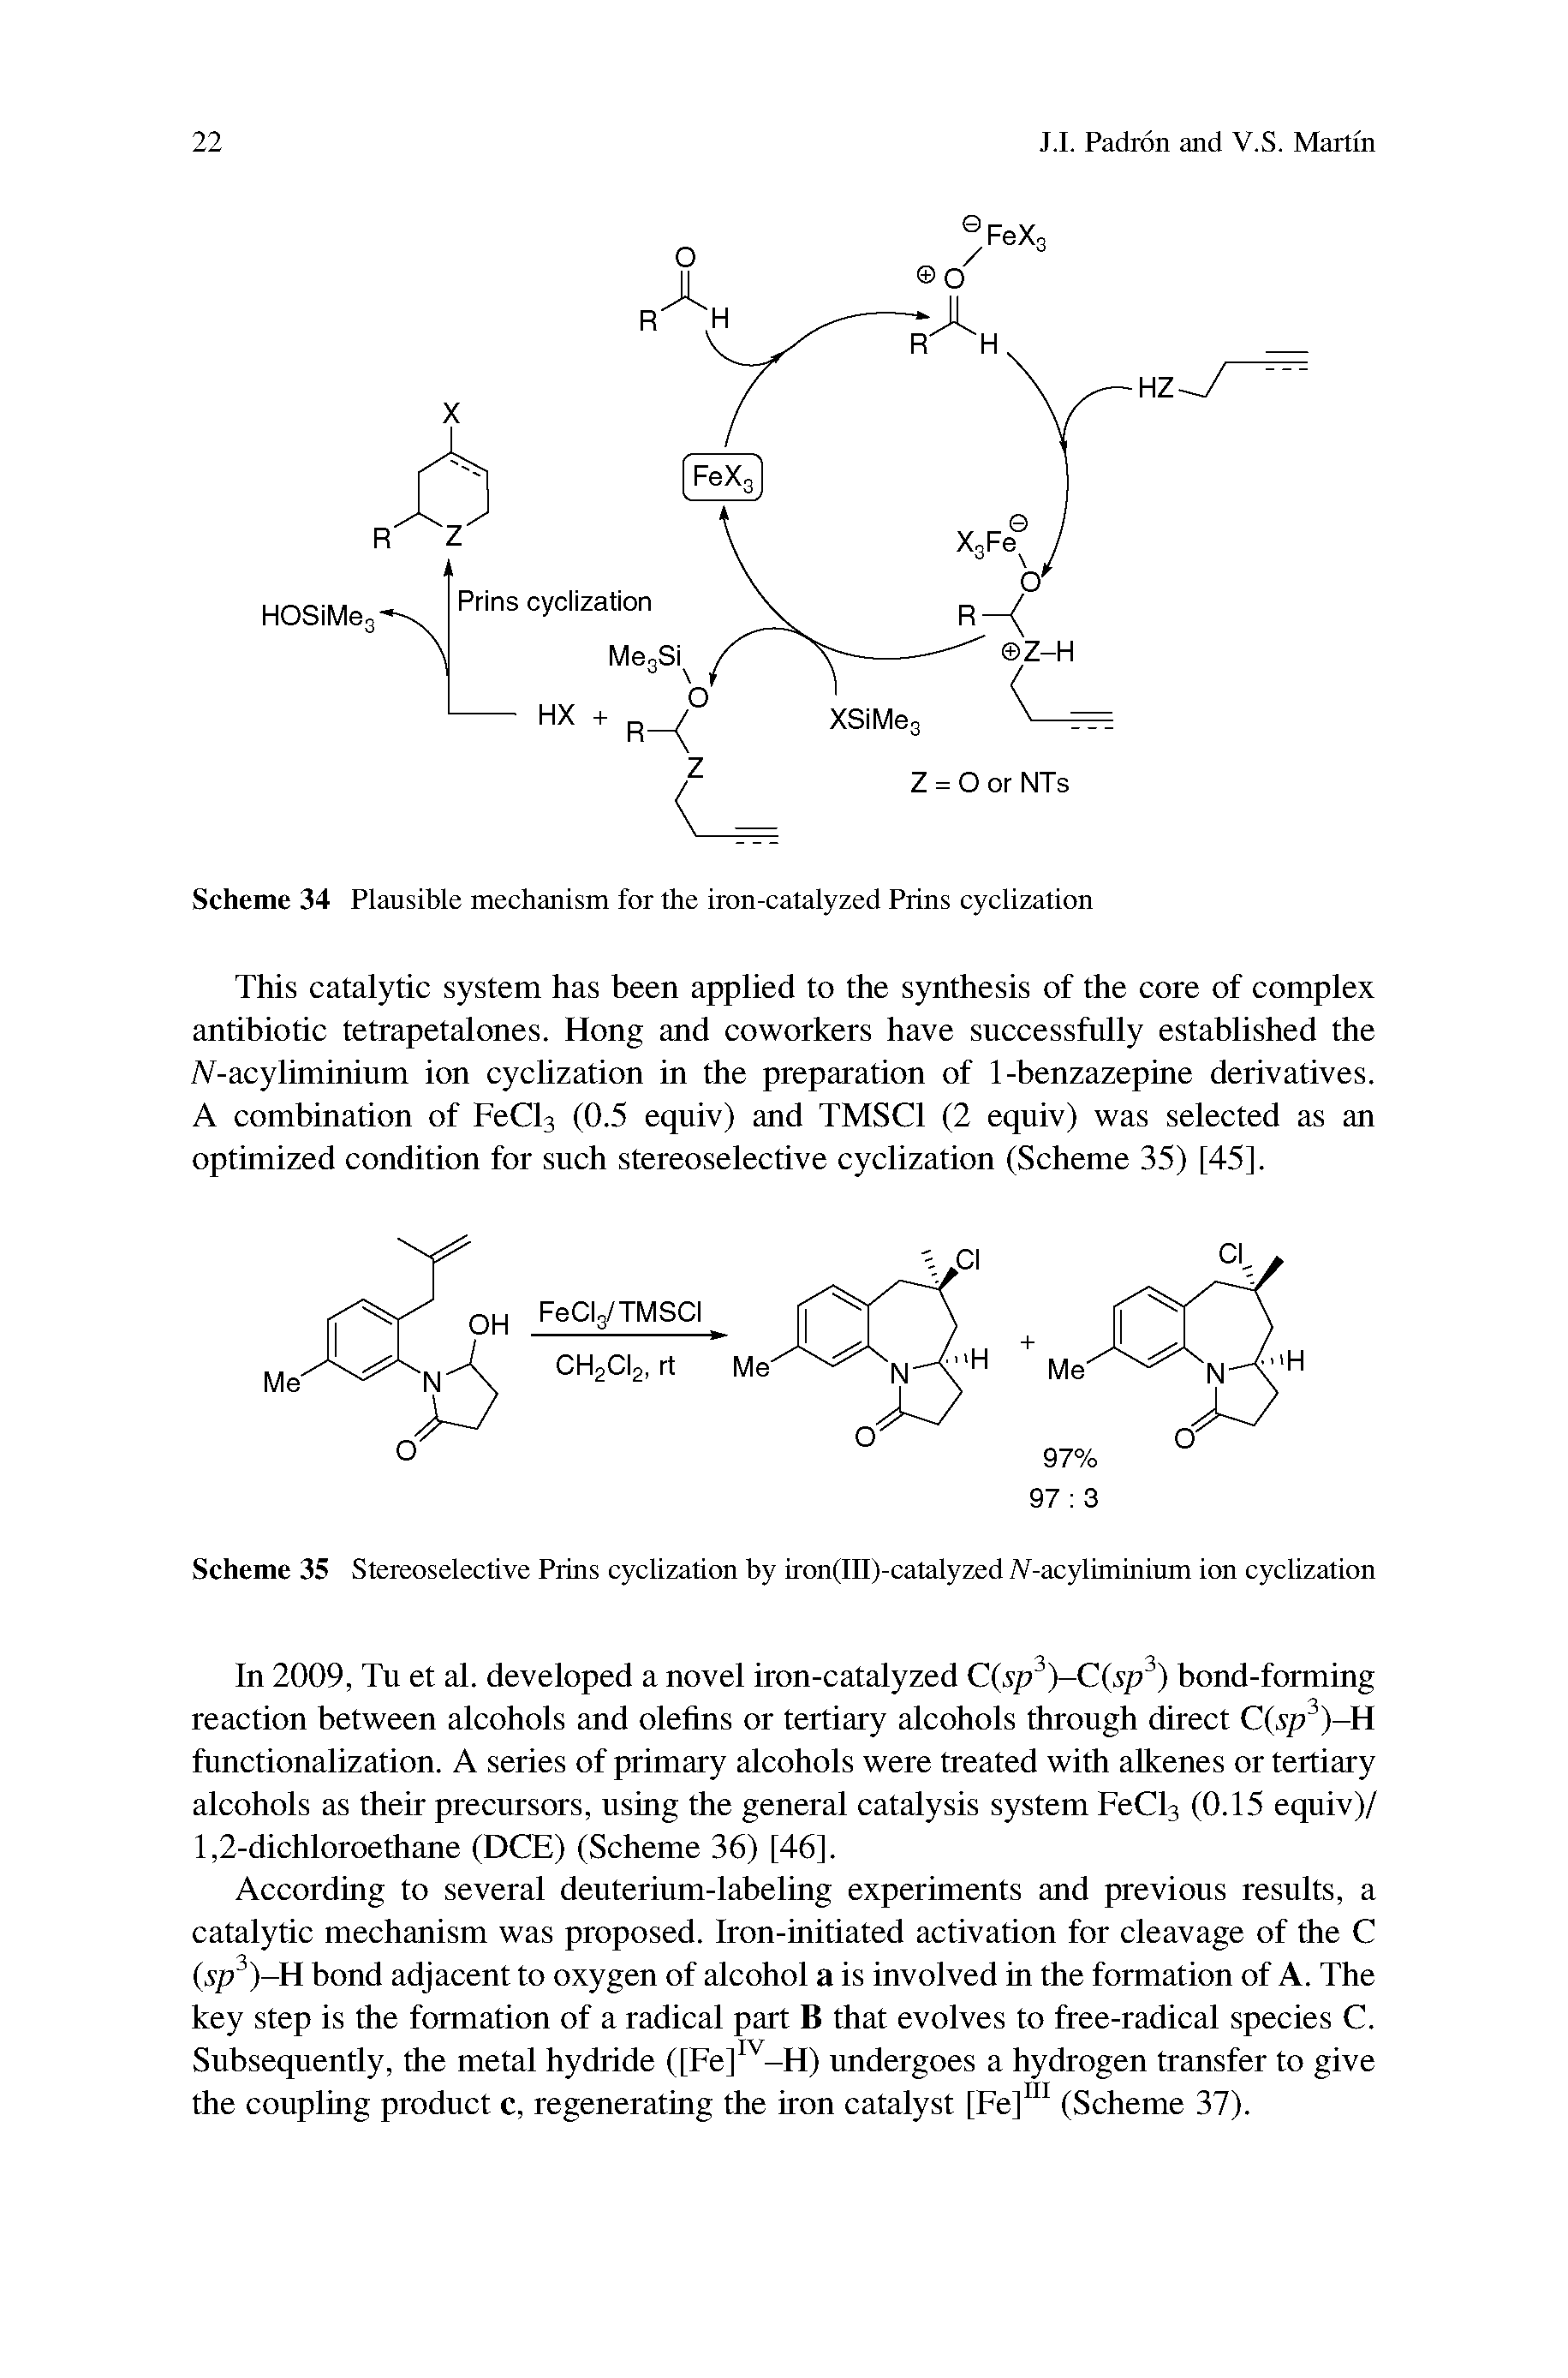 Scheme 34 Plausible mechanism for the iron-catalyzed Prins cyclization...